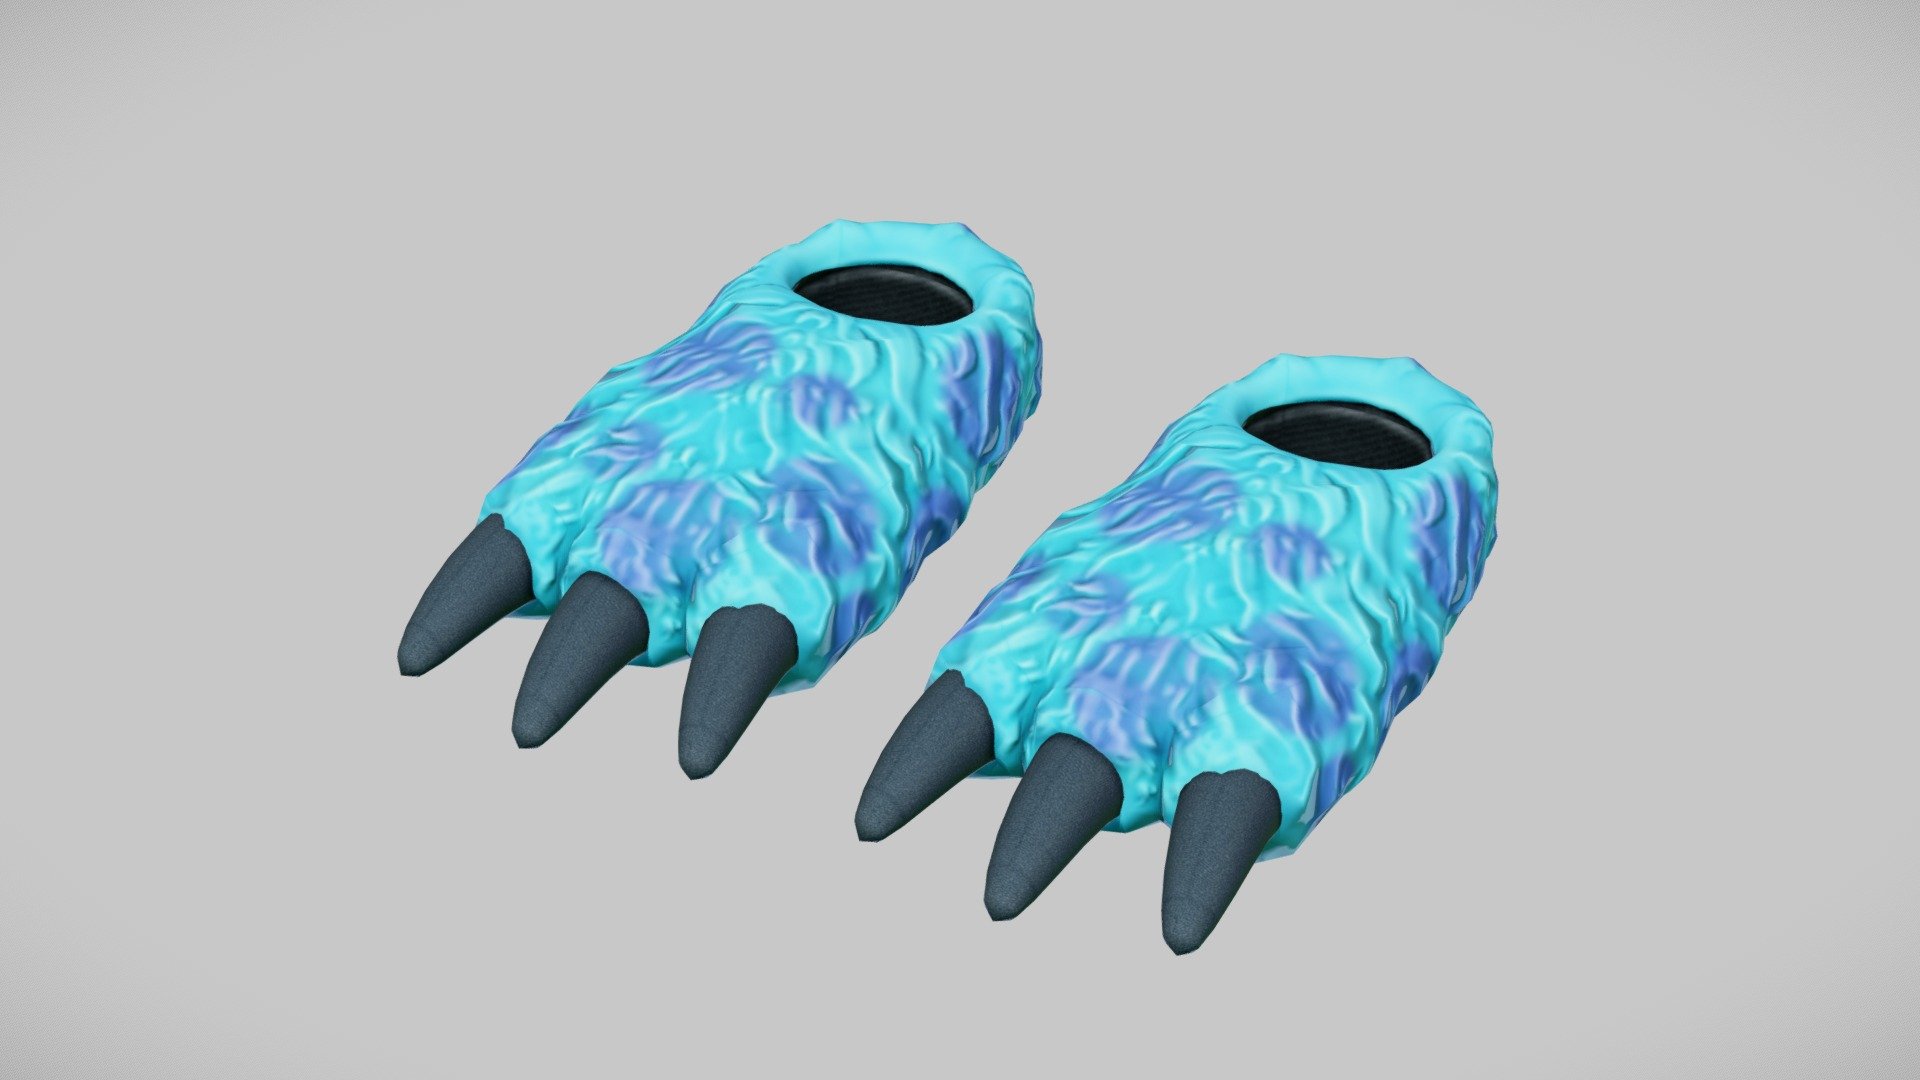 Low Poly Monster Slipper for your renders and games

Textures:

Diffuse color, Roughness, Normal

All textures are 4K

Files Formats:

Blend

Fbx

Obj - Monster Slipper - Buy Royalty Free 3D model by Vanessa Araújo (@vanessa3d) 3d model